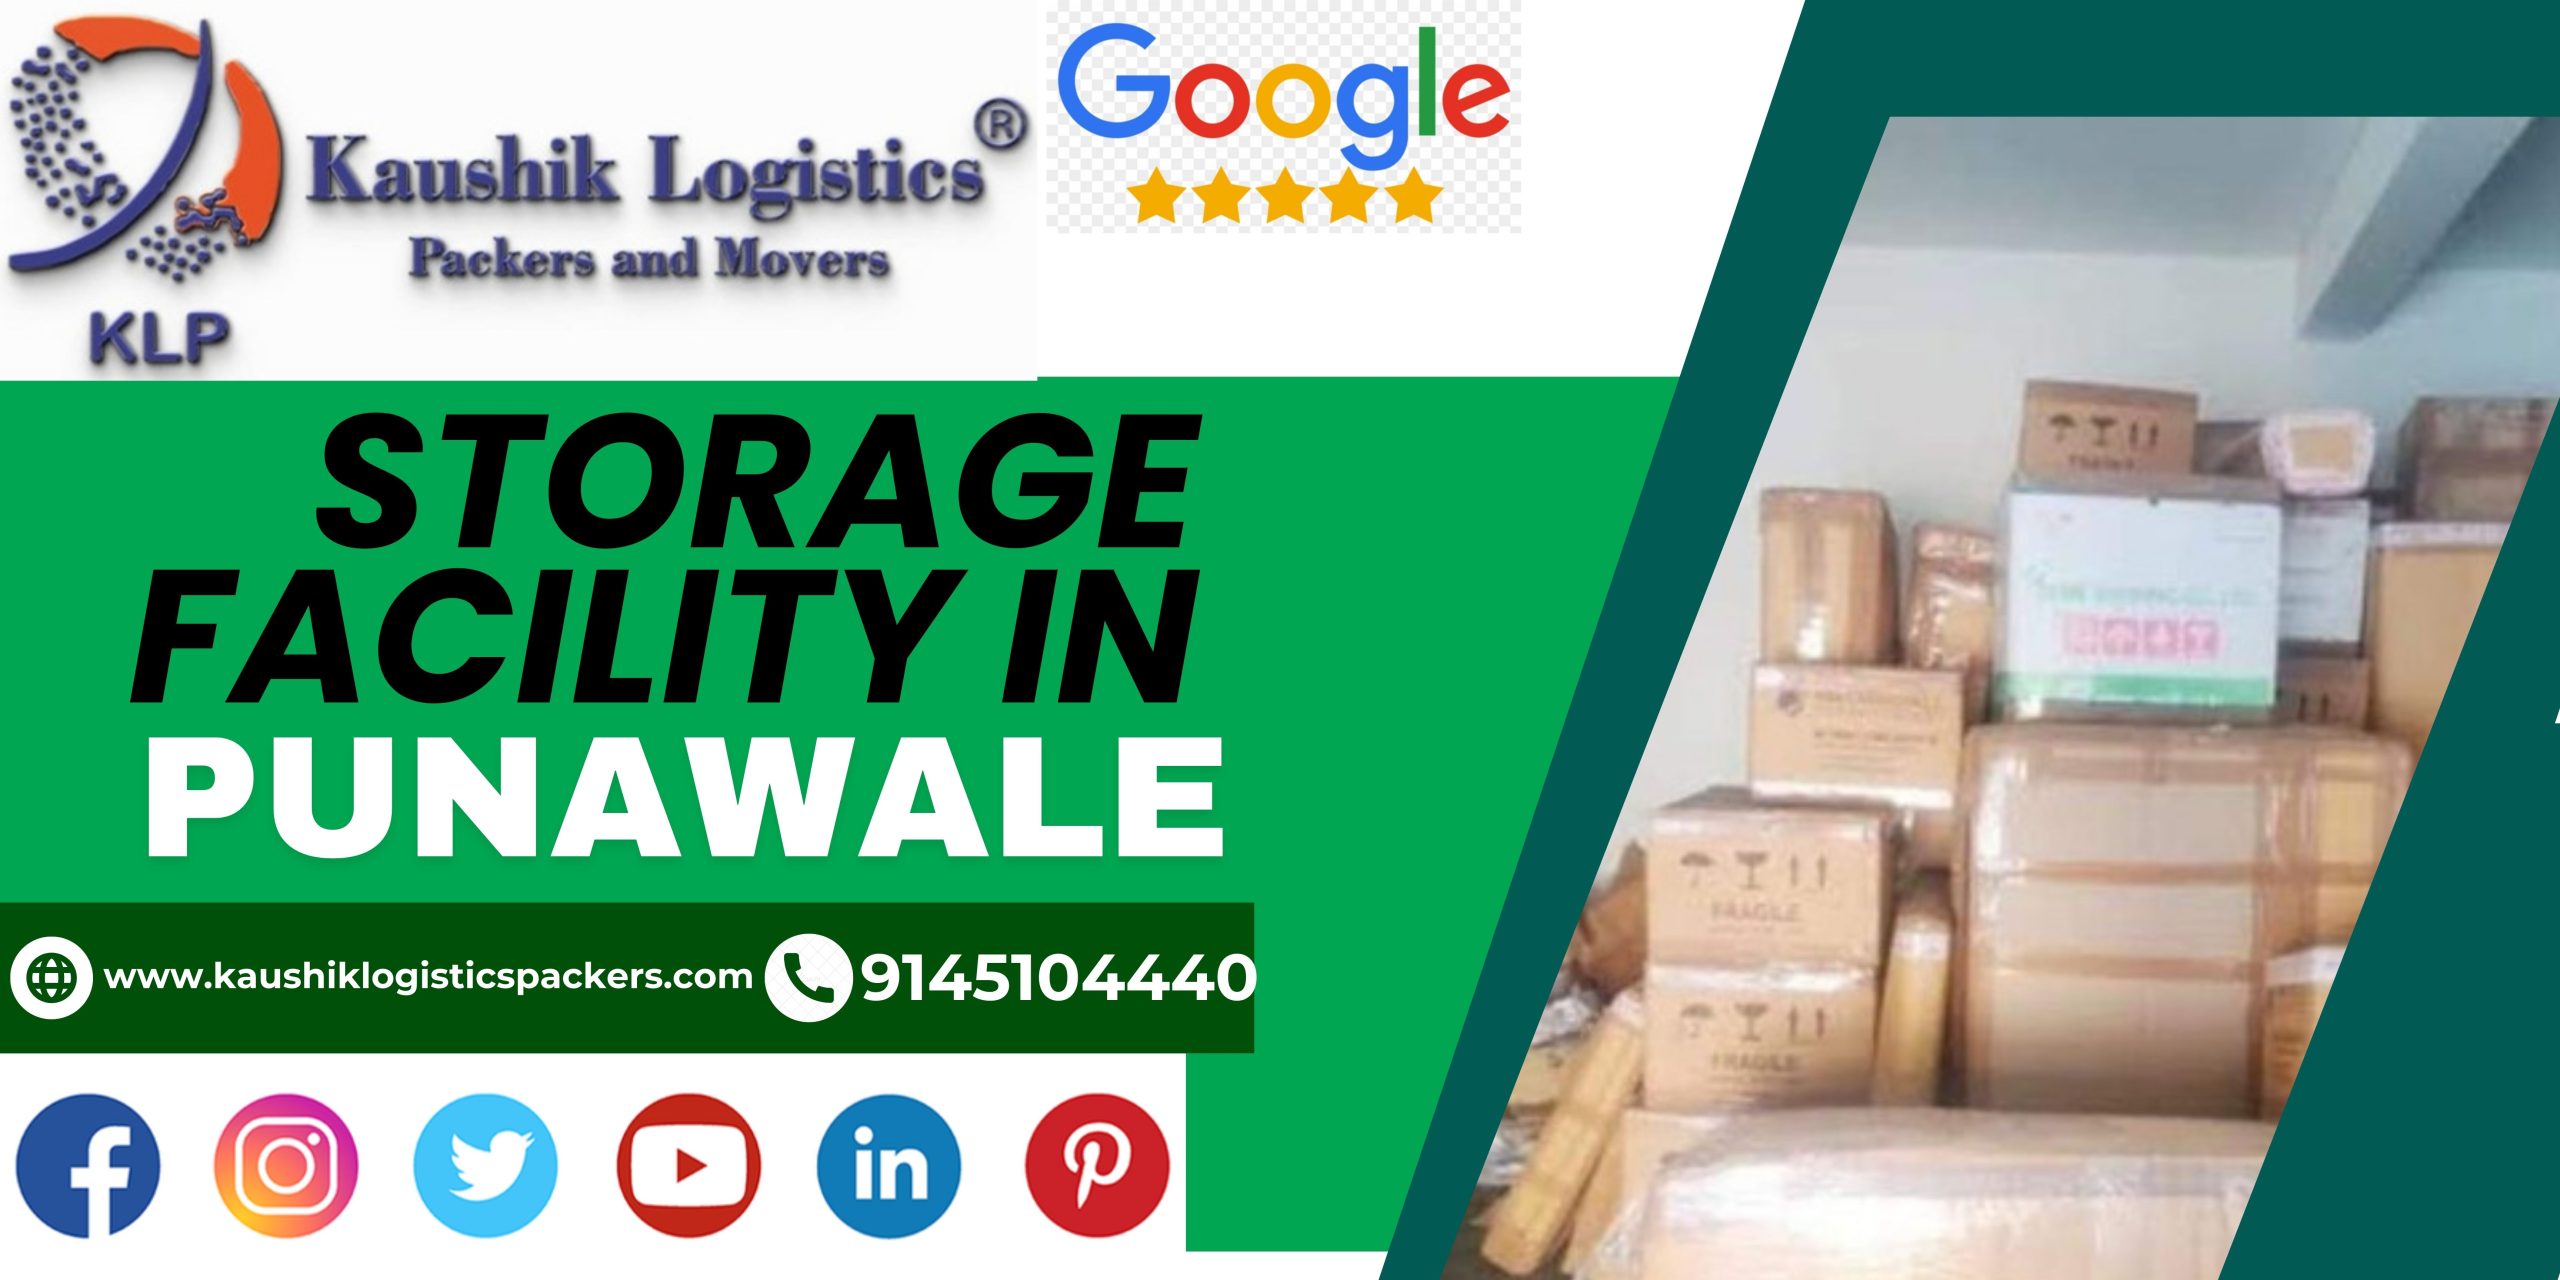 Packers and Movers In Punawale